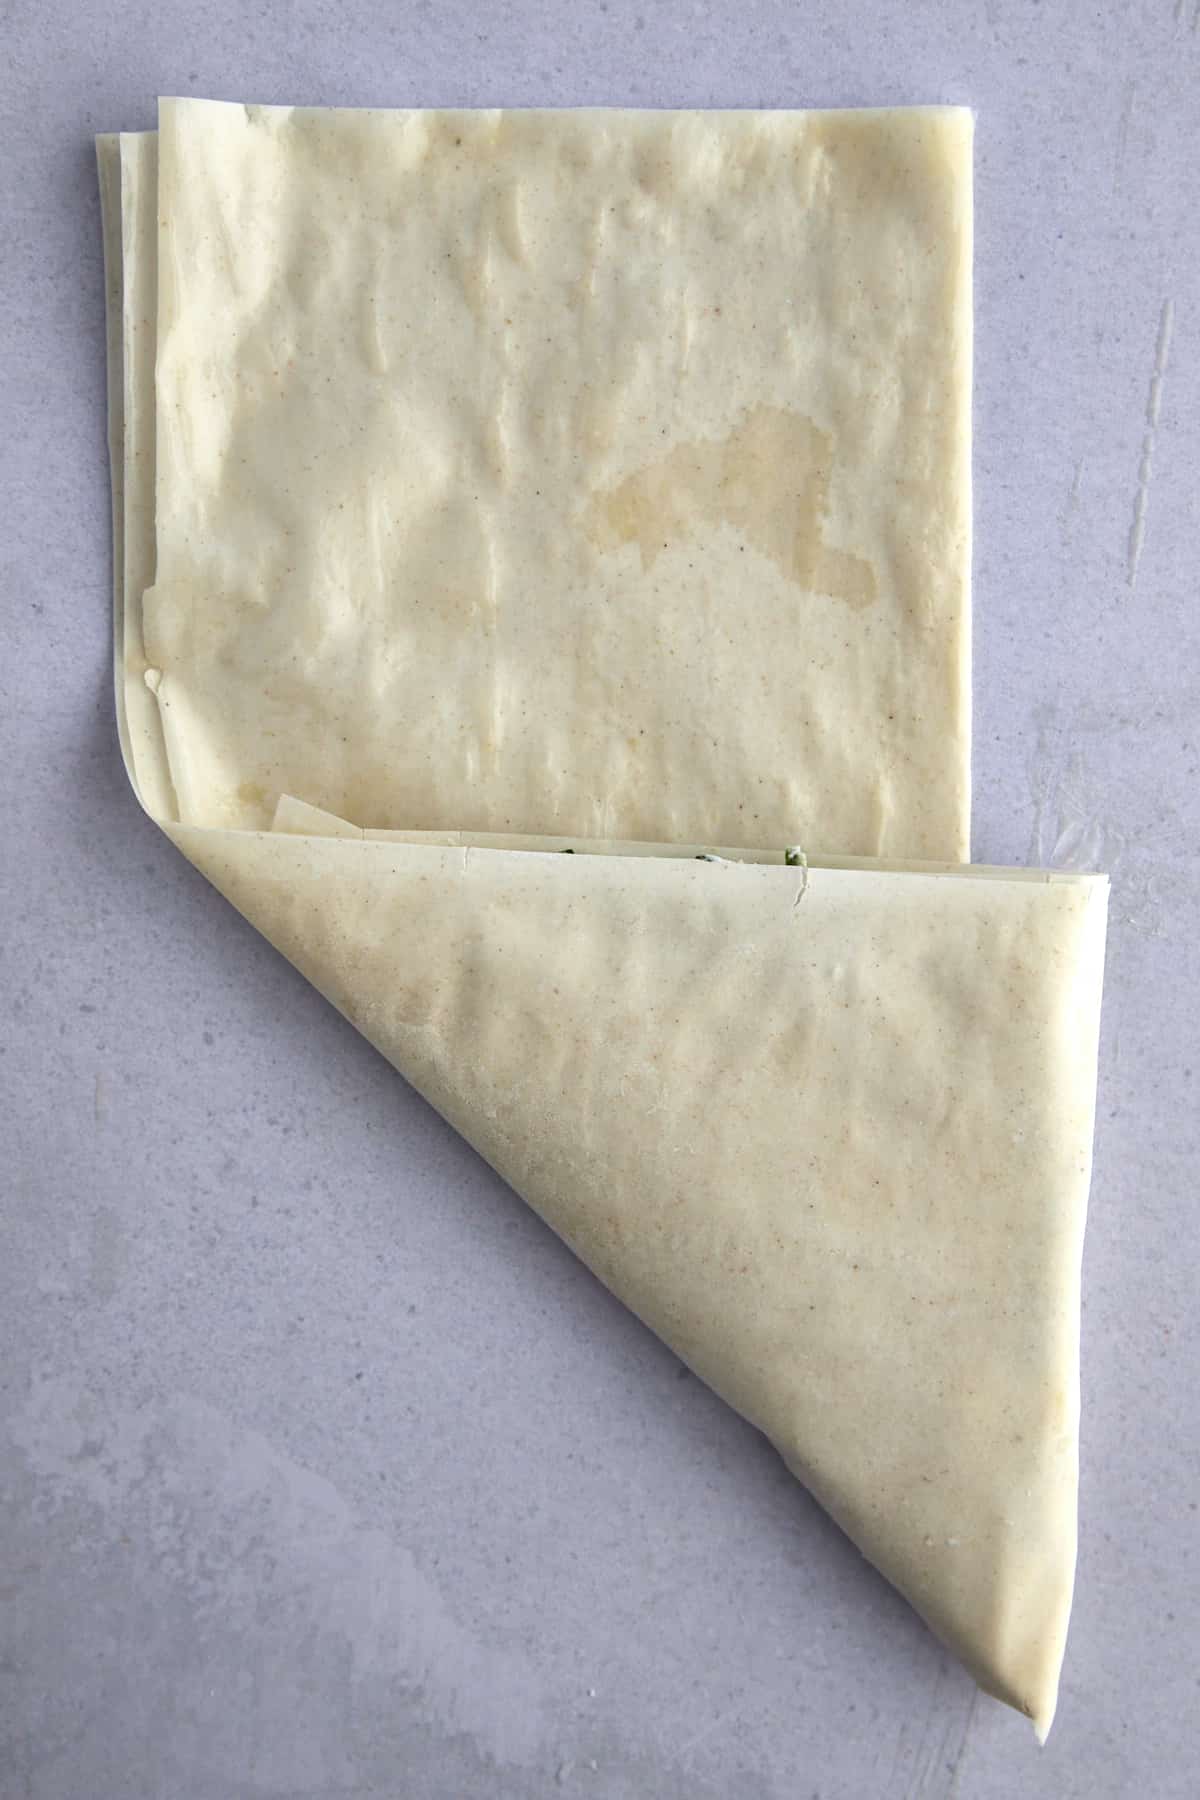 Raw phyllo dough being folded into a triangle. 